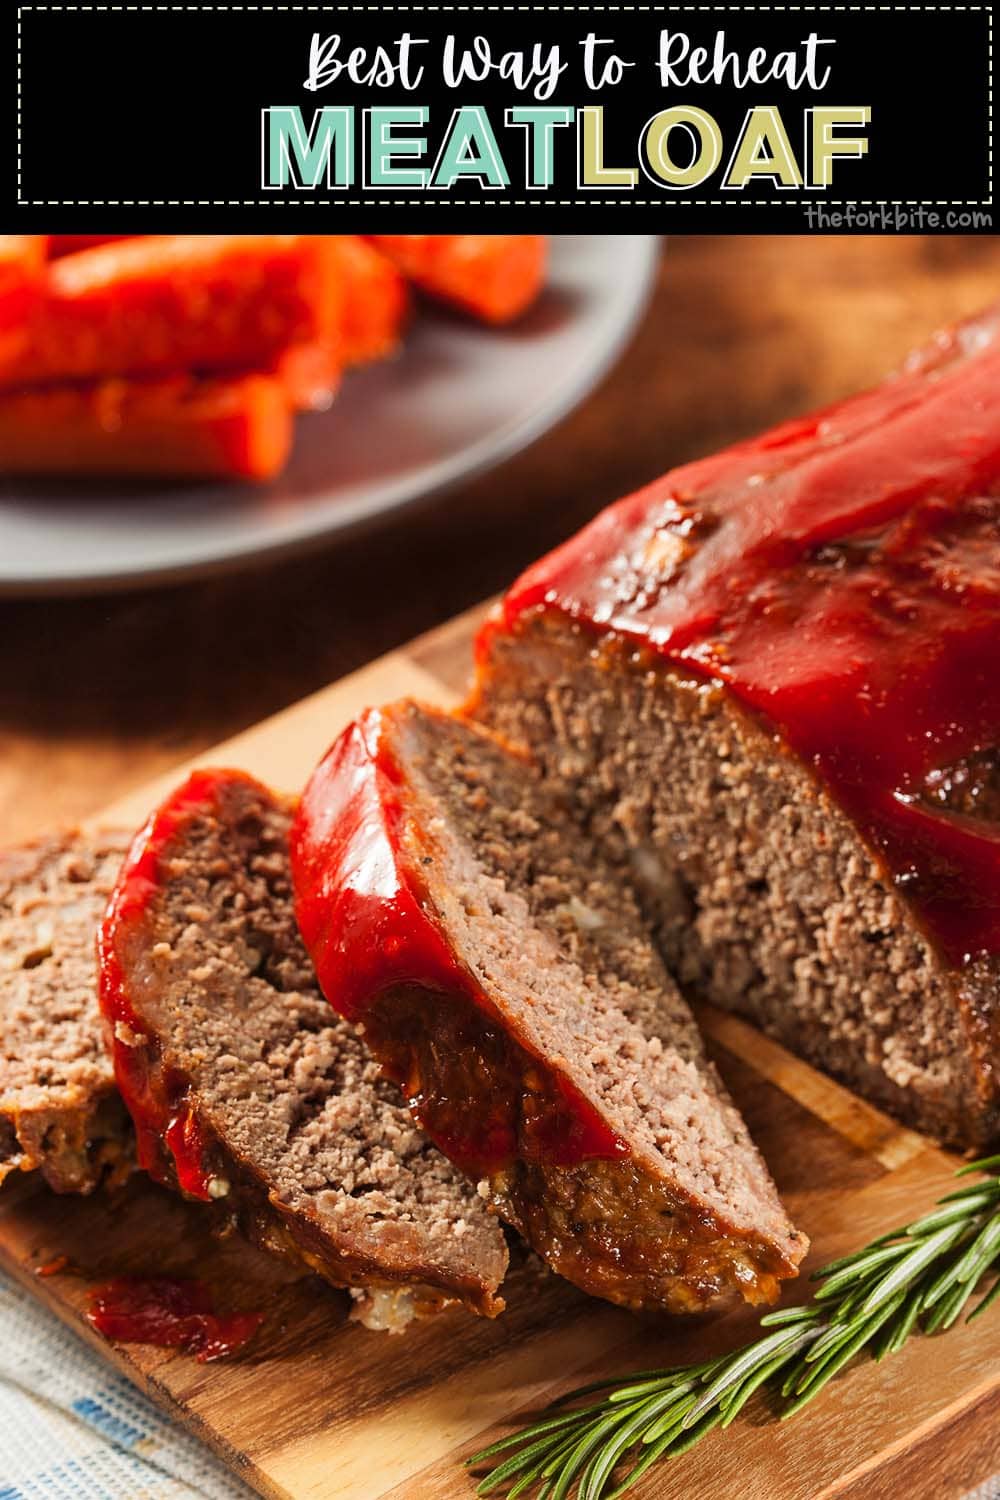 Meatloaf tastes even better when reheated, the only thing you've got to be careful of is the method you use on reheating meatloaf.